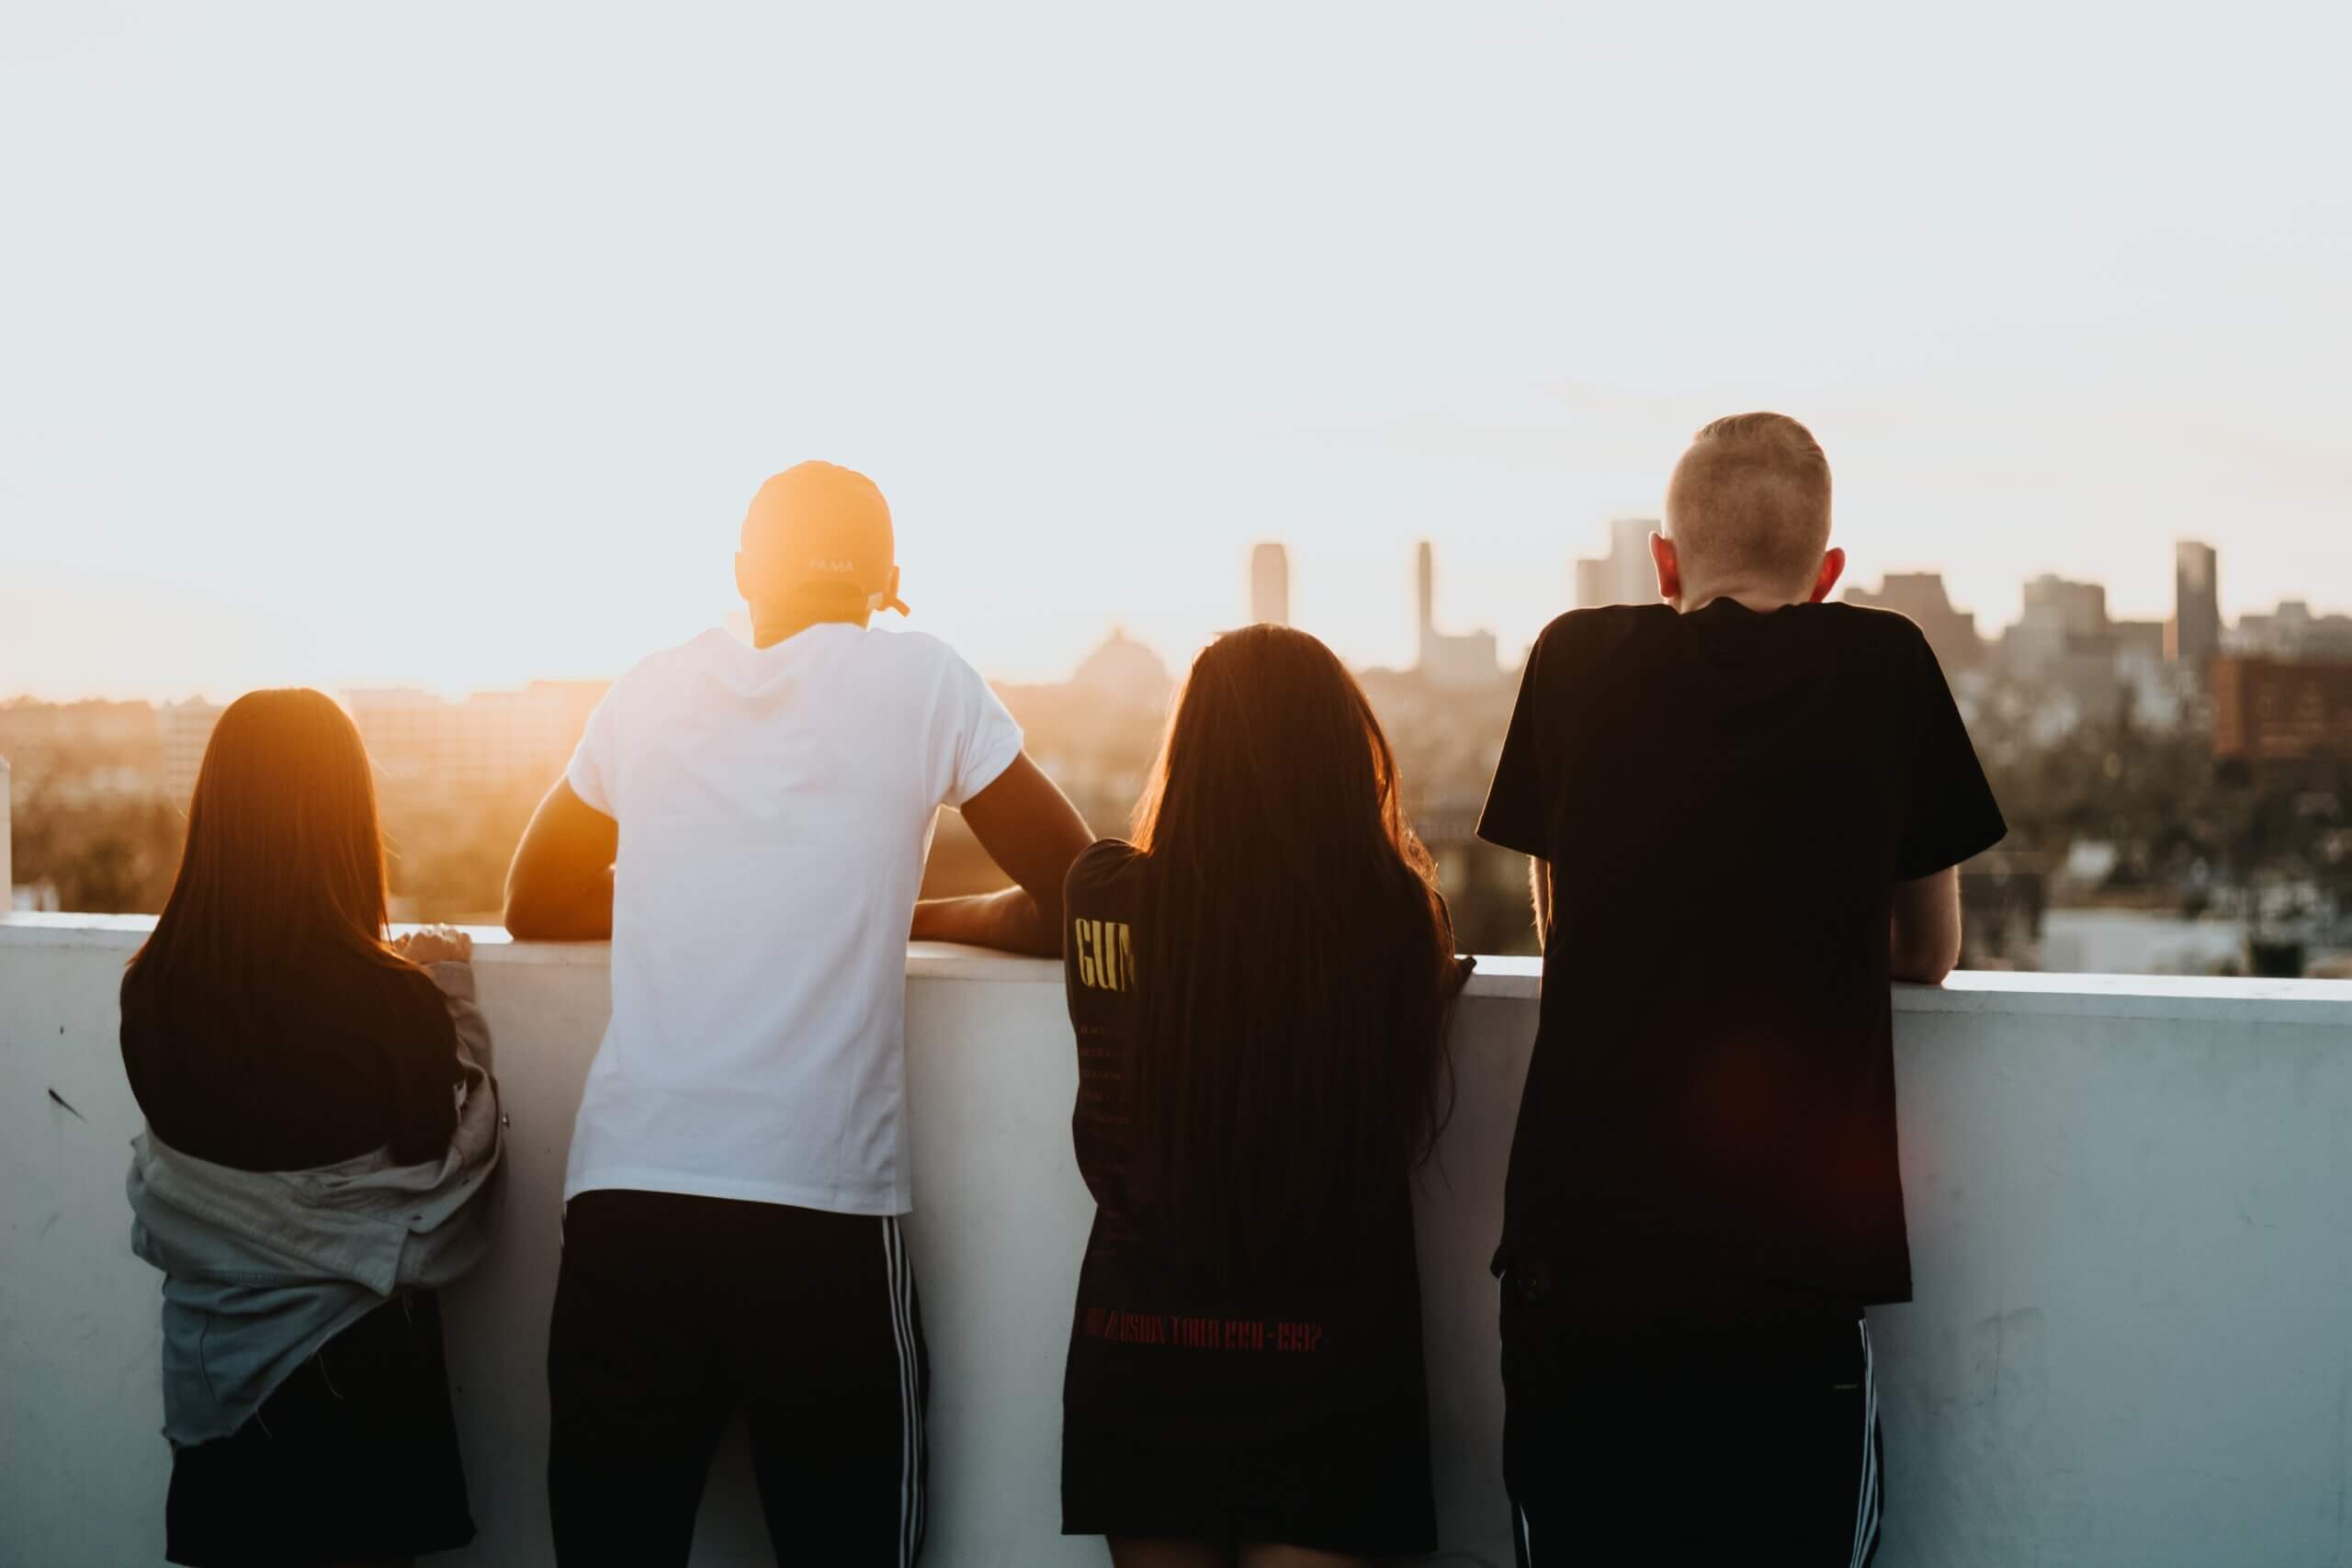 Group of 4 teens from behind on a balcony over looking the sunset